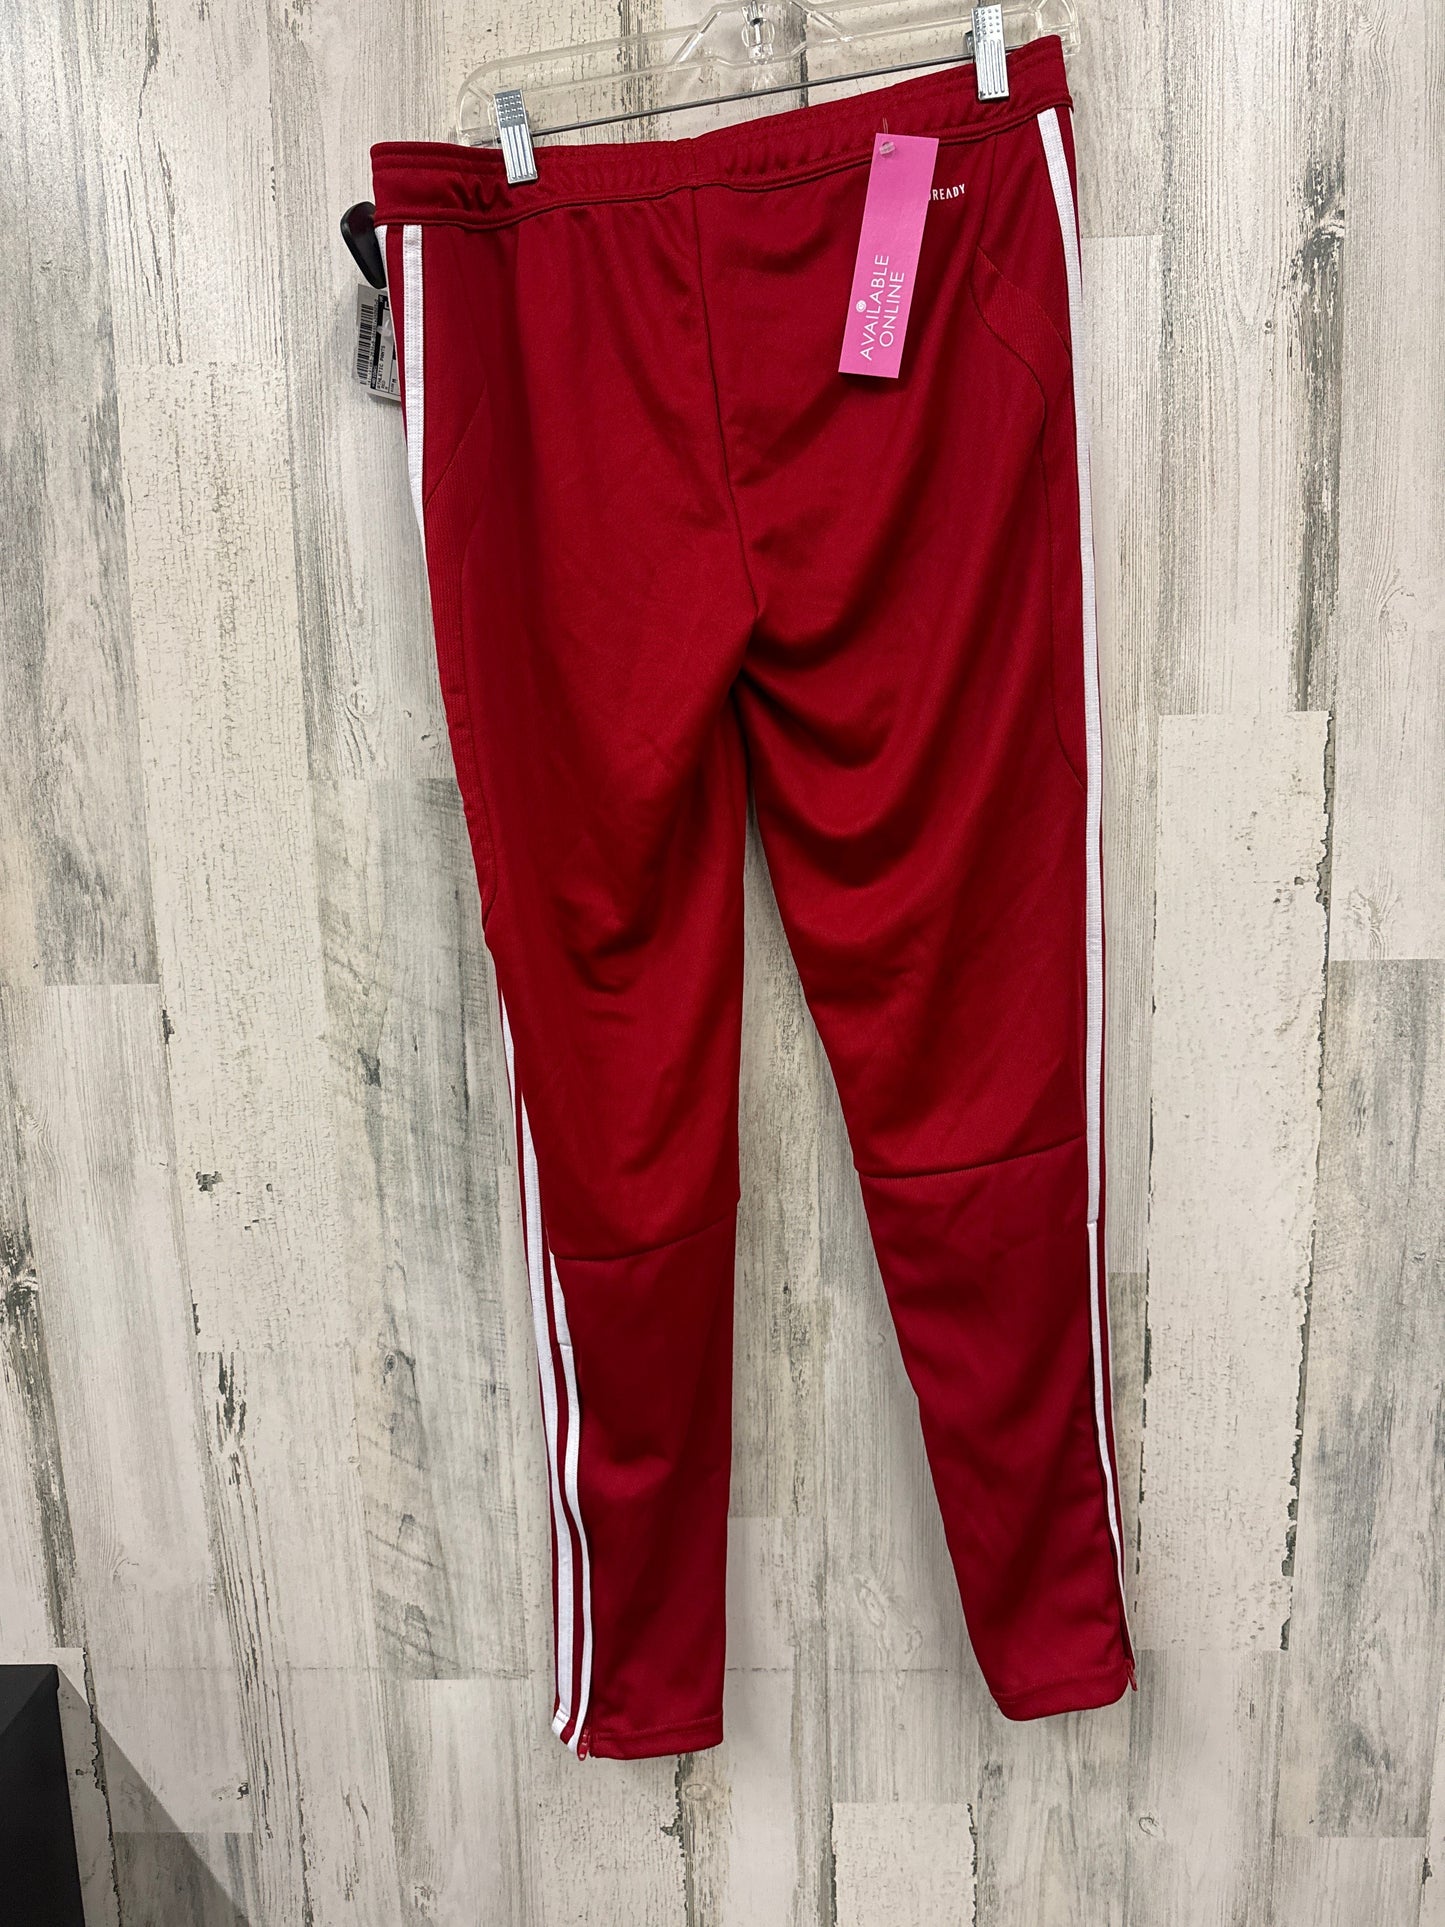 Red Athletic Pants Adidas, Size M